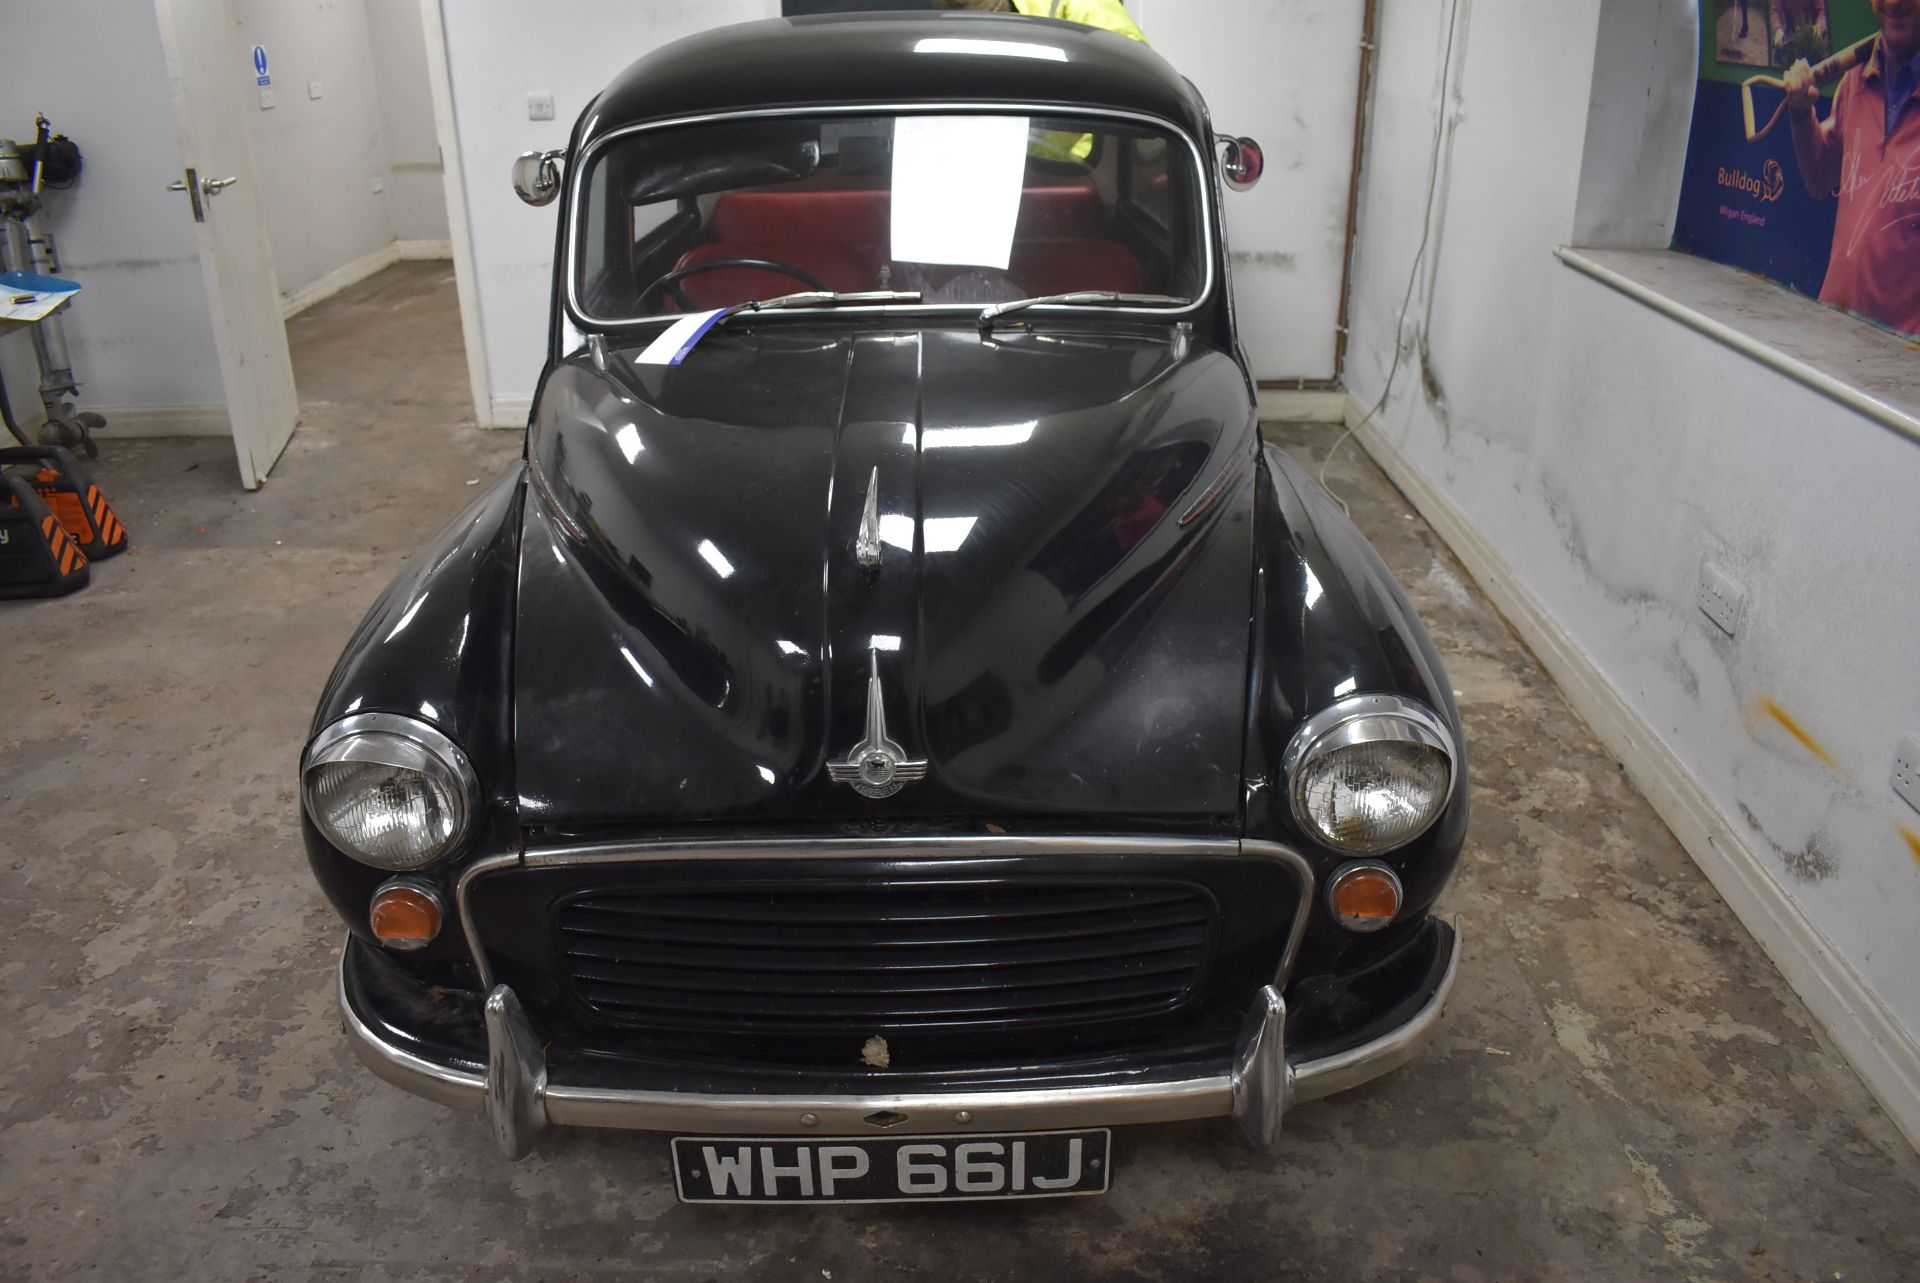 Morris MINOR 1000 TWO DOOR CLASSIC SALOON, registration no. WHP 661J, date first registered 23/03/ - Image 16 of 19